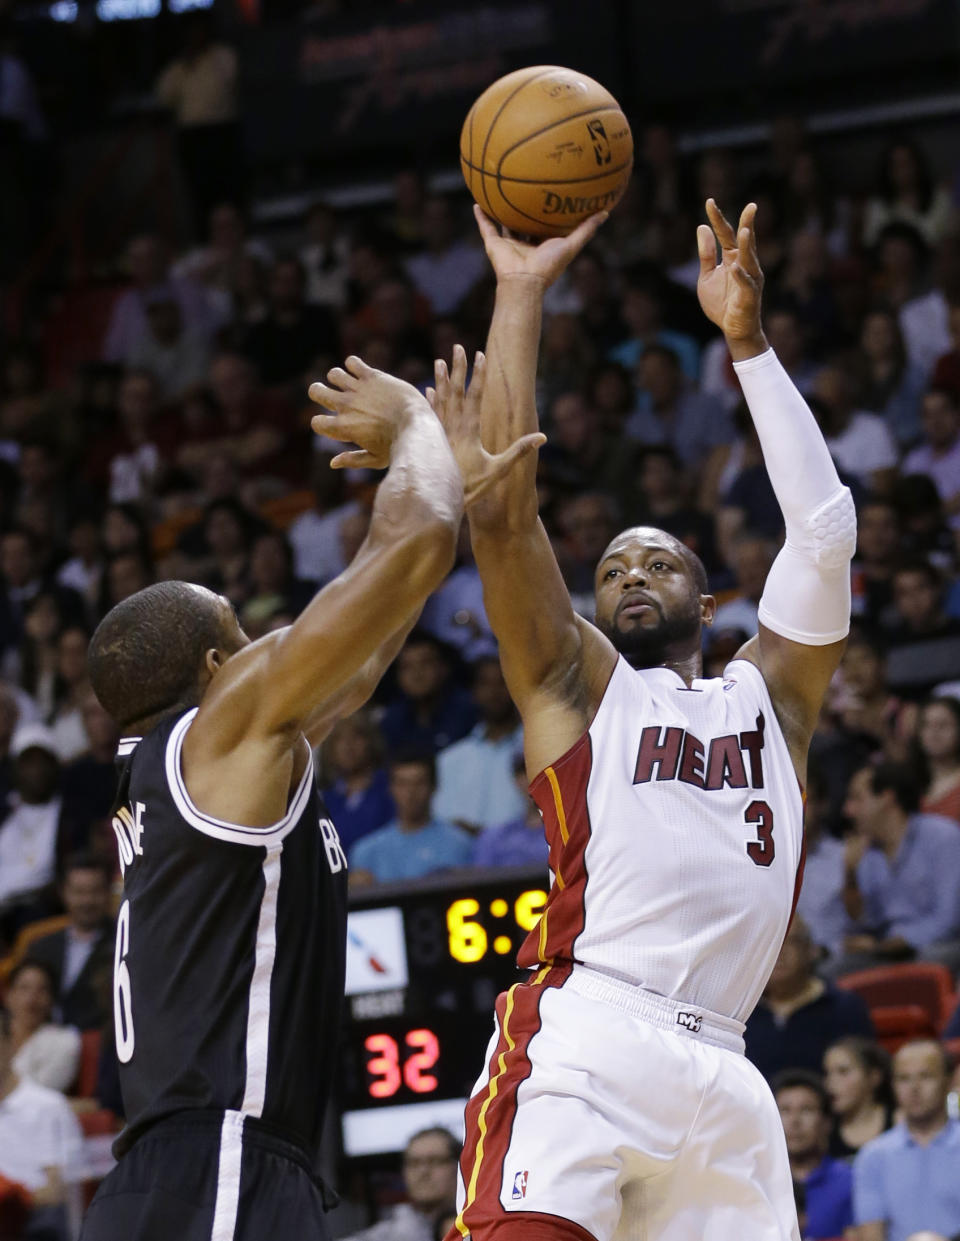 Miami Heat guard Dwyane Wade (3) takes a shot against Brooklyn Nets forward Alan Anderson (6) during the first half of an NBA basketball game, Wednesday, March 12, 2014, in Miami. (AP Photo/Wilfredo Lee)